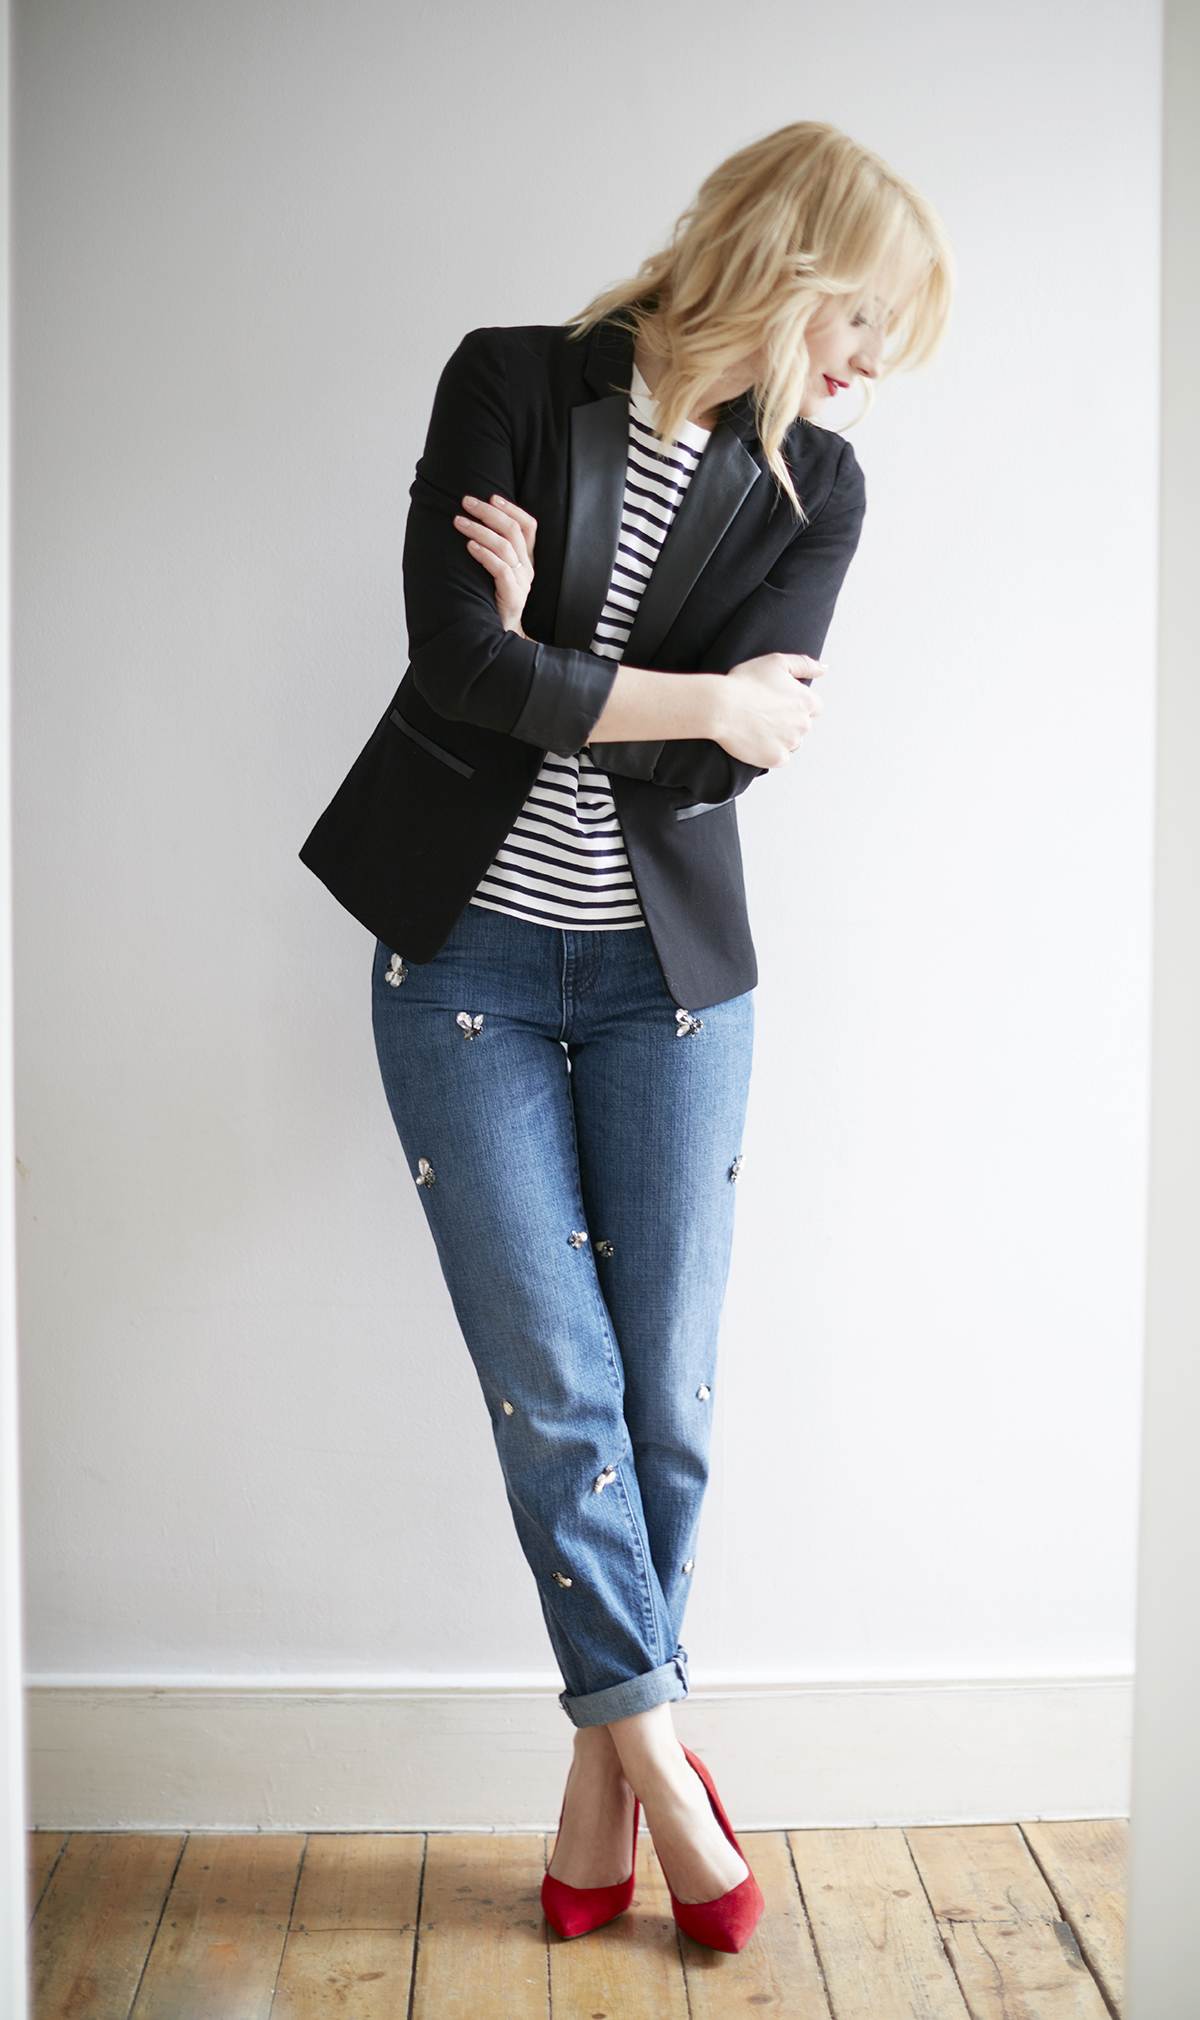 https://cocomamastyle.com/wp-content/uploads/2016/01/cocomamastyle-denim-stripe-and-blazer-outfit2.jpg